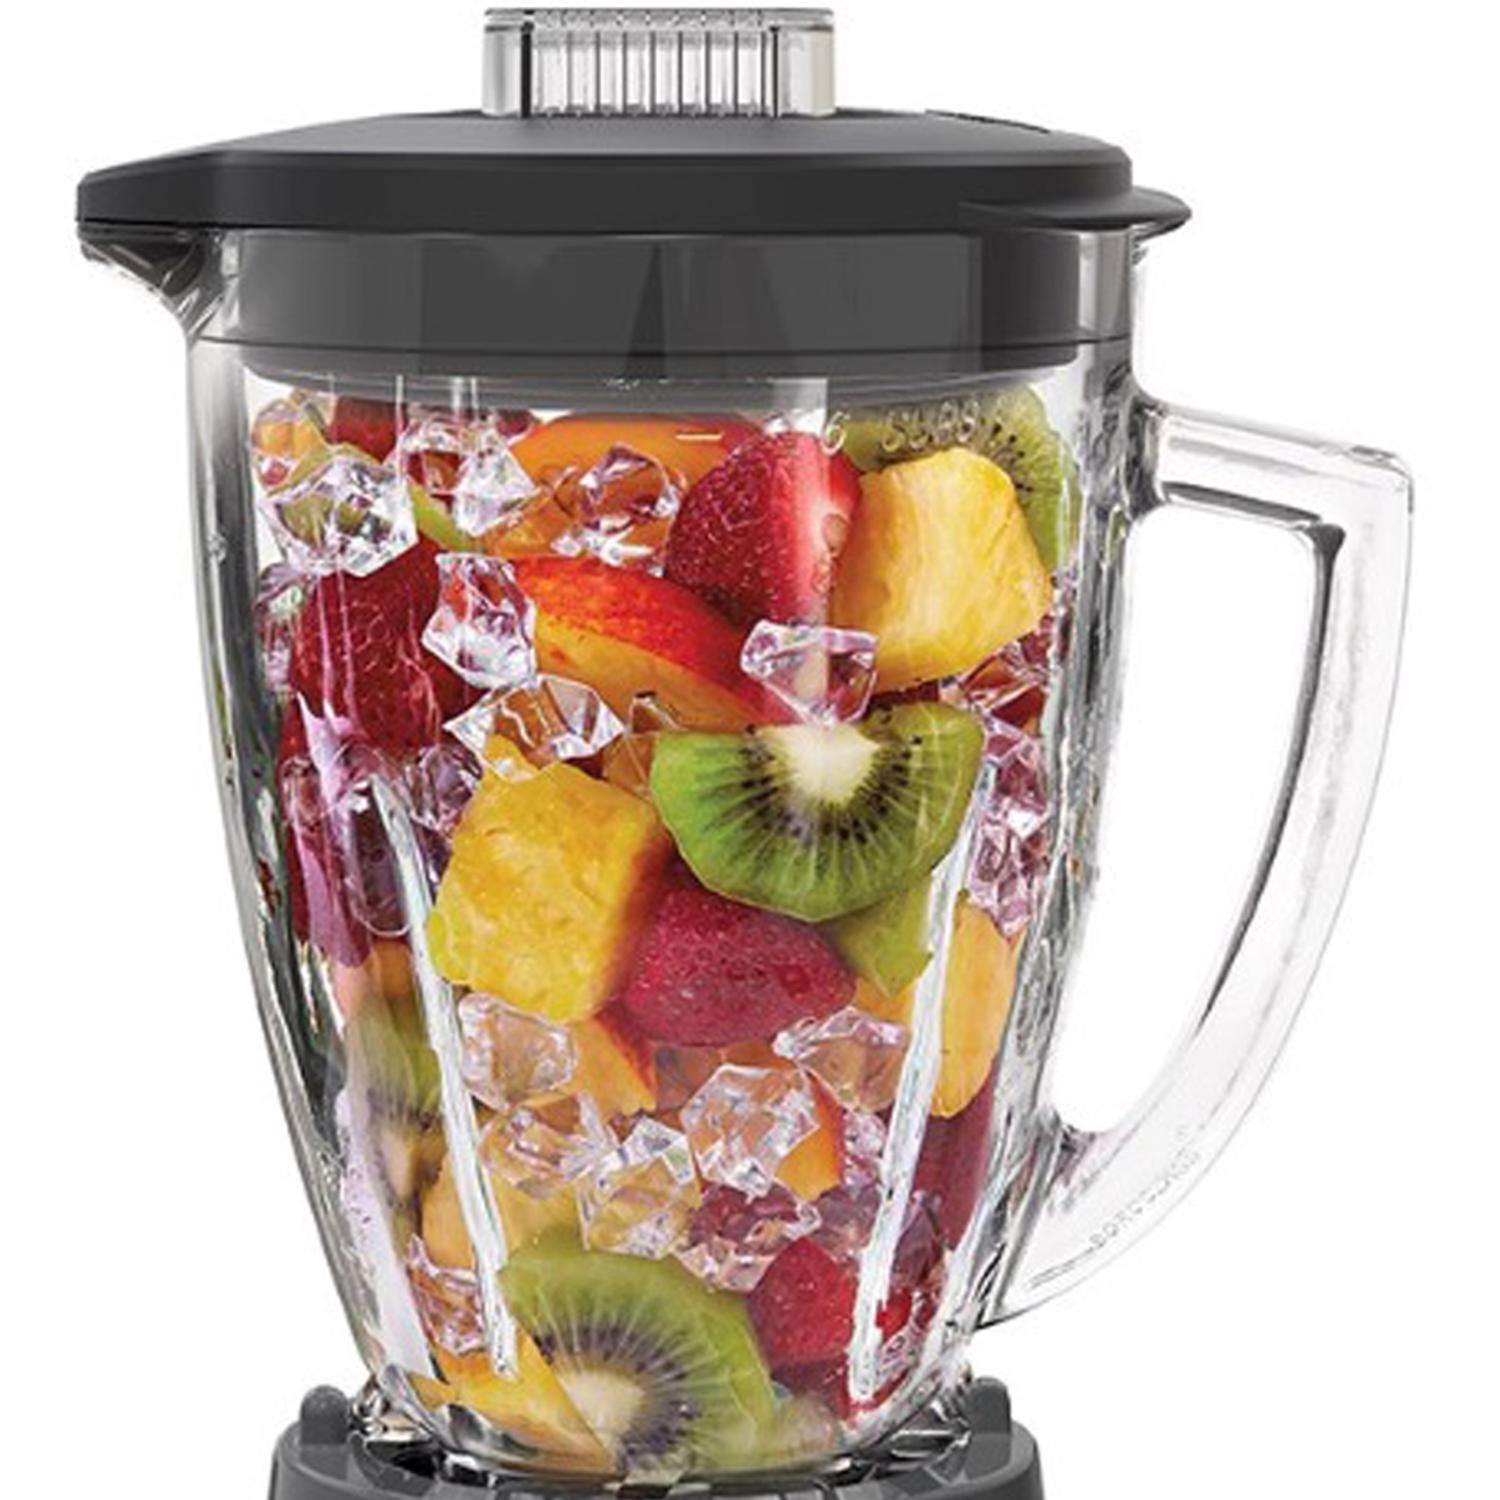 Arrow Home Products Fruit Pitcher, 76 Ounce